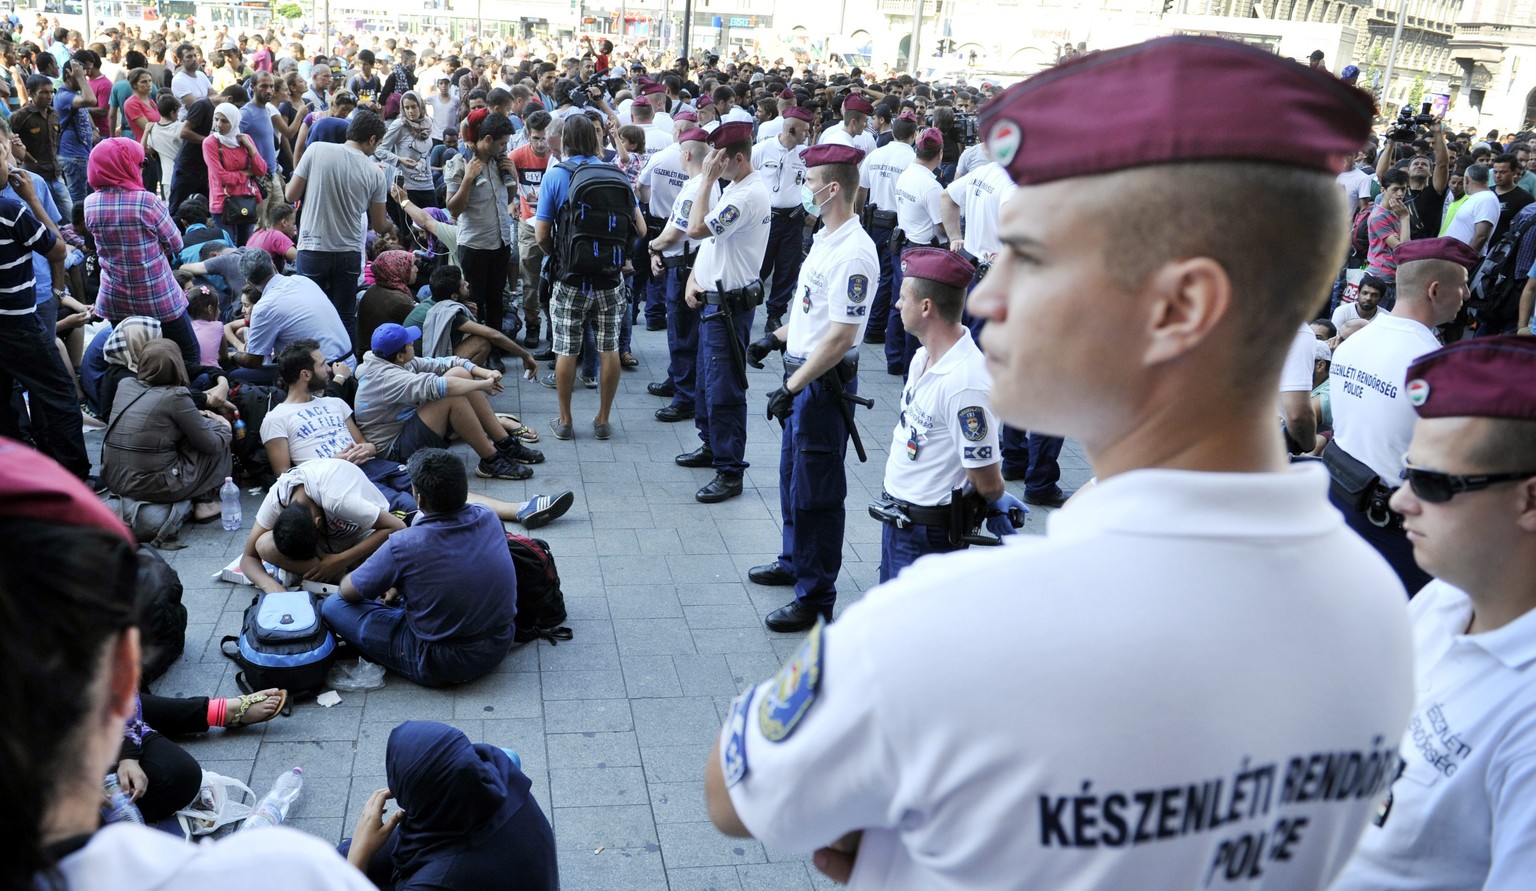 Migrants wait in front of the Keleti Railway Station in Budapest, Hungary, Tuesday, Sept. 1, 2015, after police stopped them from getting on a train to Germany and evacuated the station. (Tamas Kovacs ...